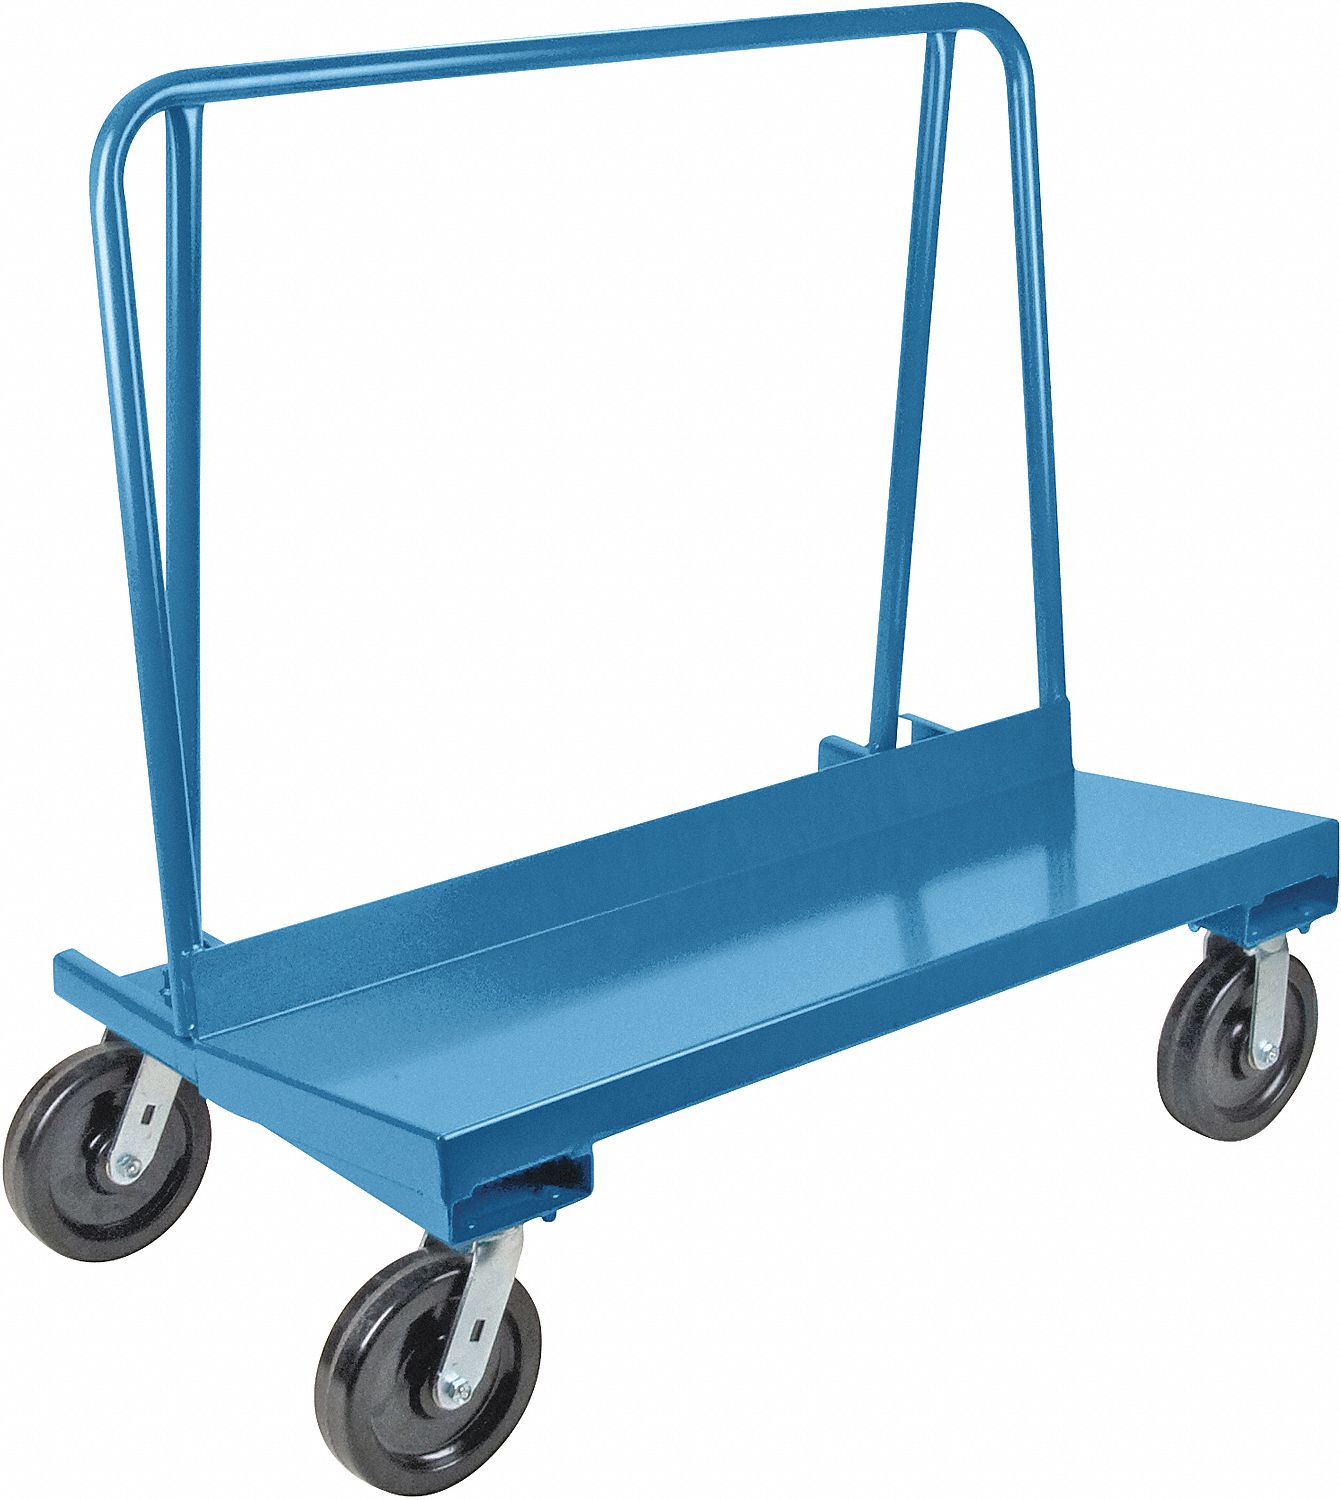 A-FRAME PANEL TRUCK, LD CAP 3500 LBS, BLUE, 44 X 24 X 43 1/2 IN, CASTER 8 IN, STEEL